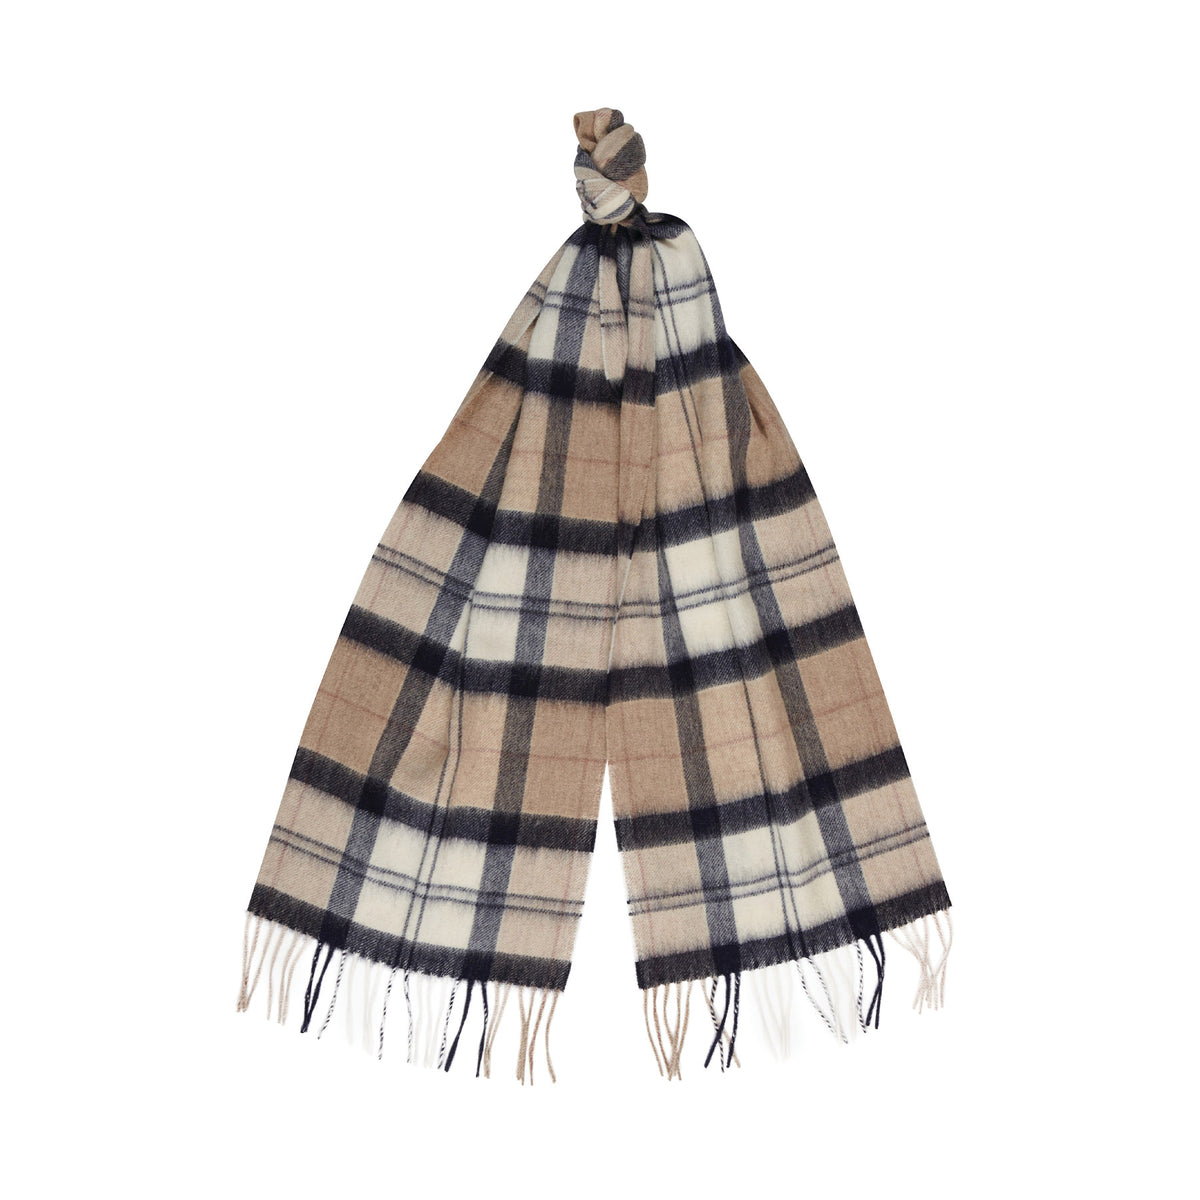 Hero image featuring the Barbour Tartan Scarf in rosewood.